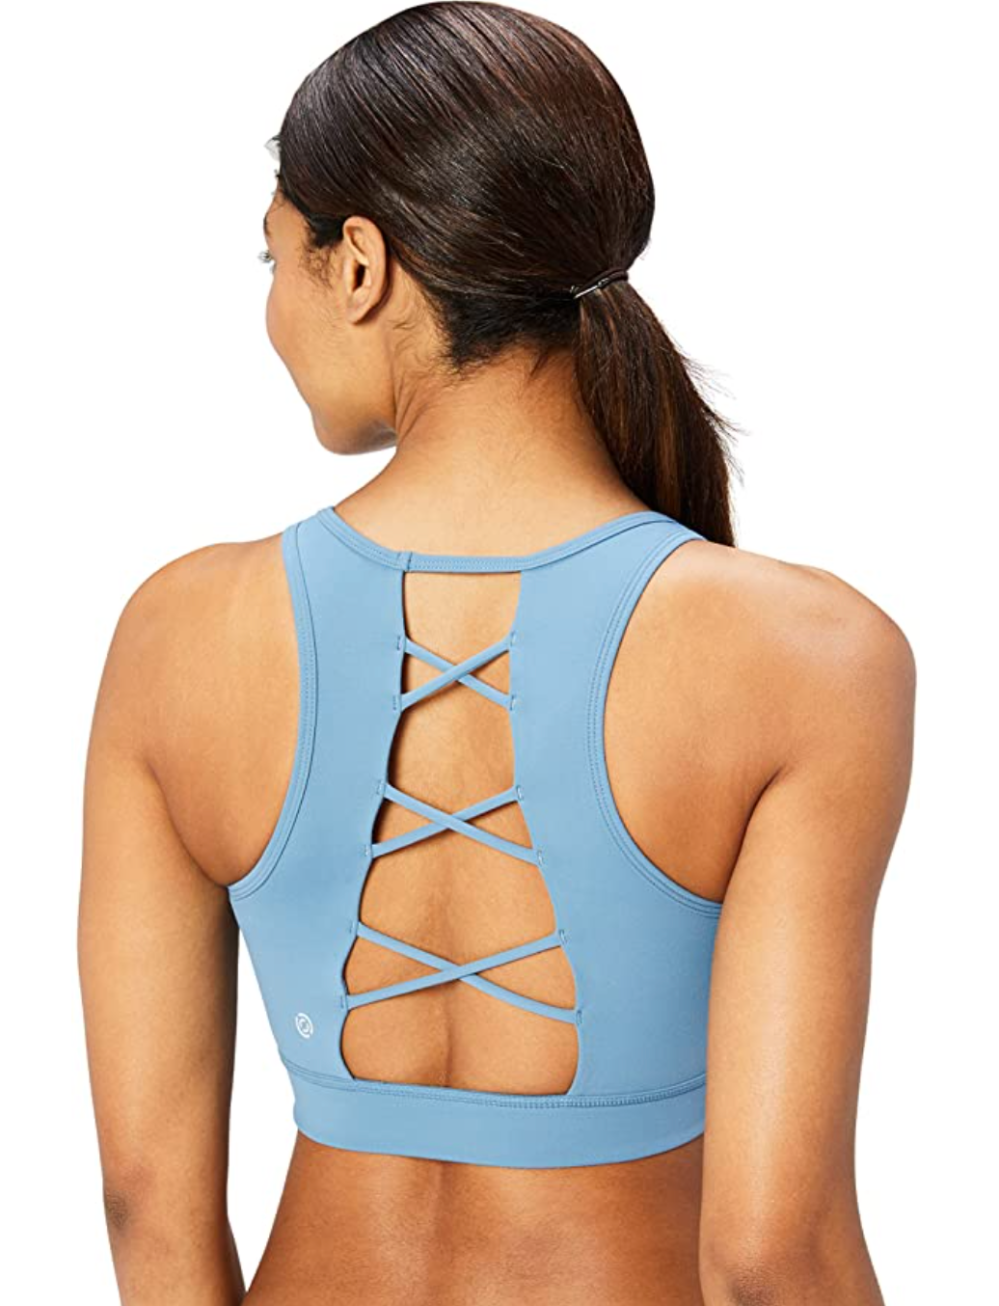 Core 10 Women's Comfort Light Support Strappy Back Longline Sports